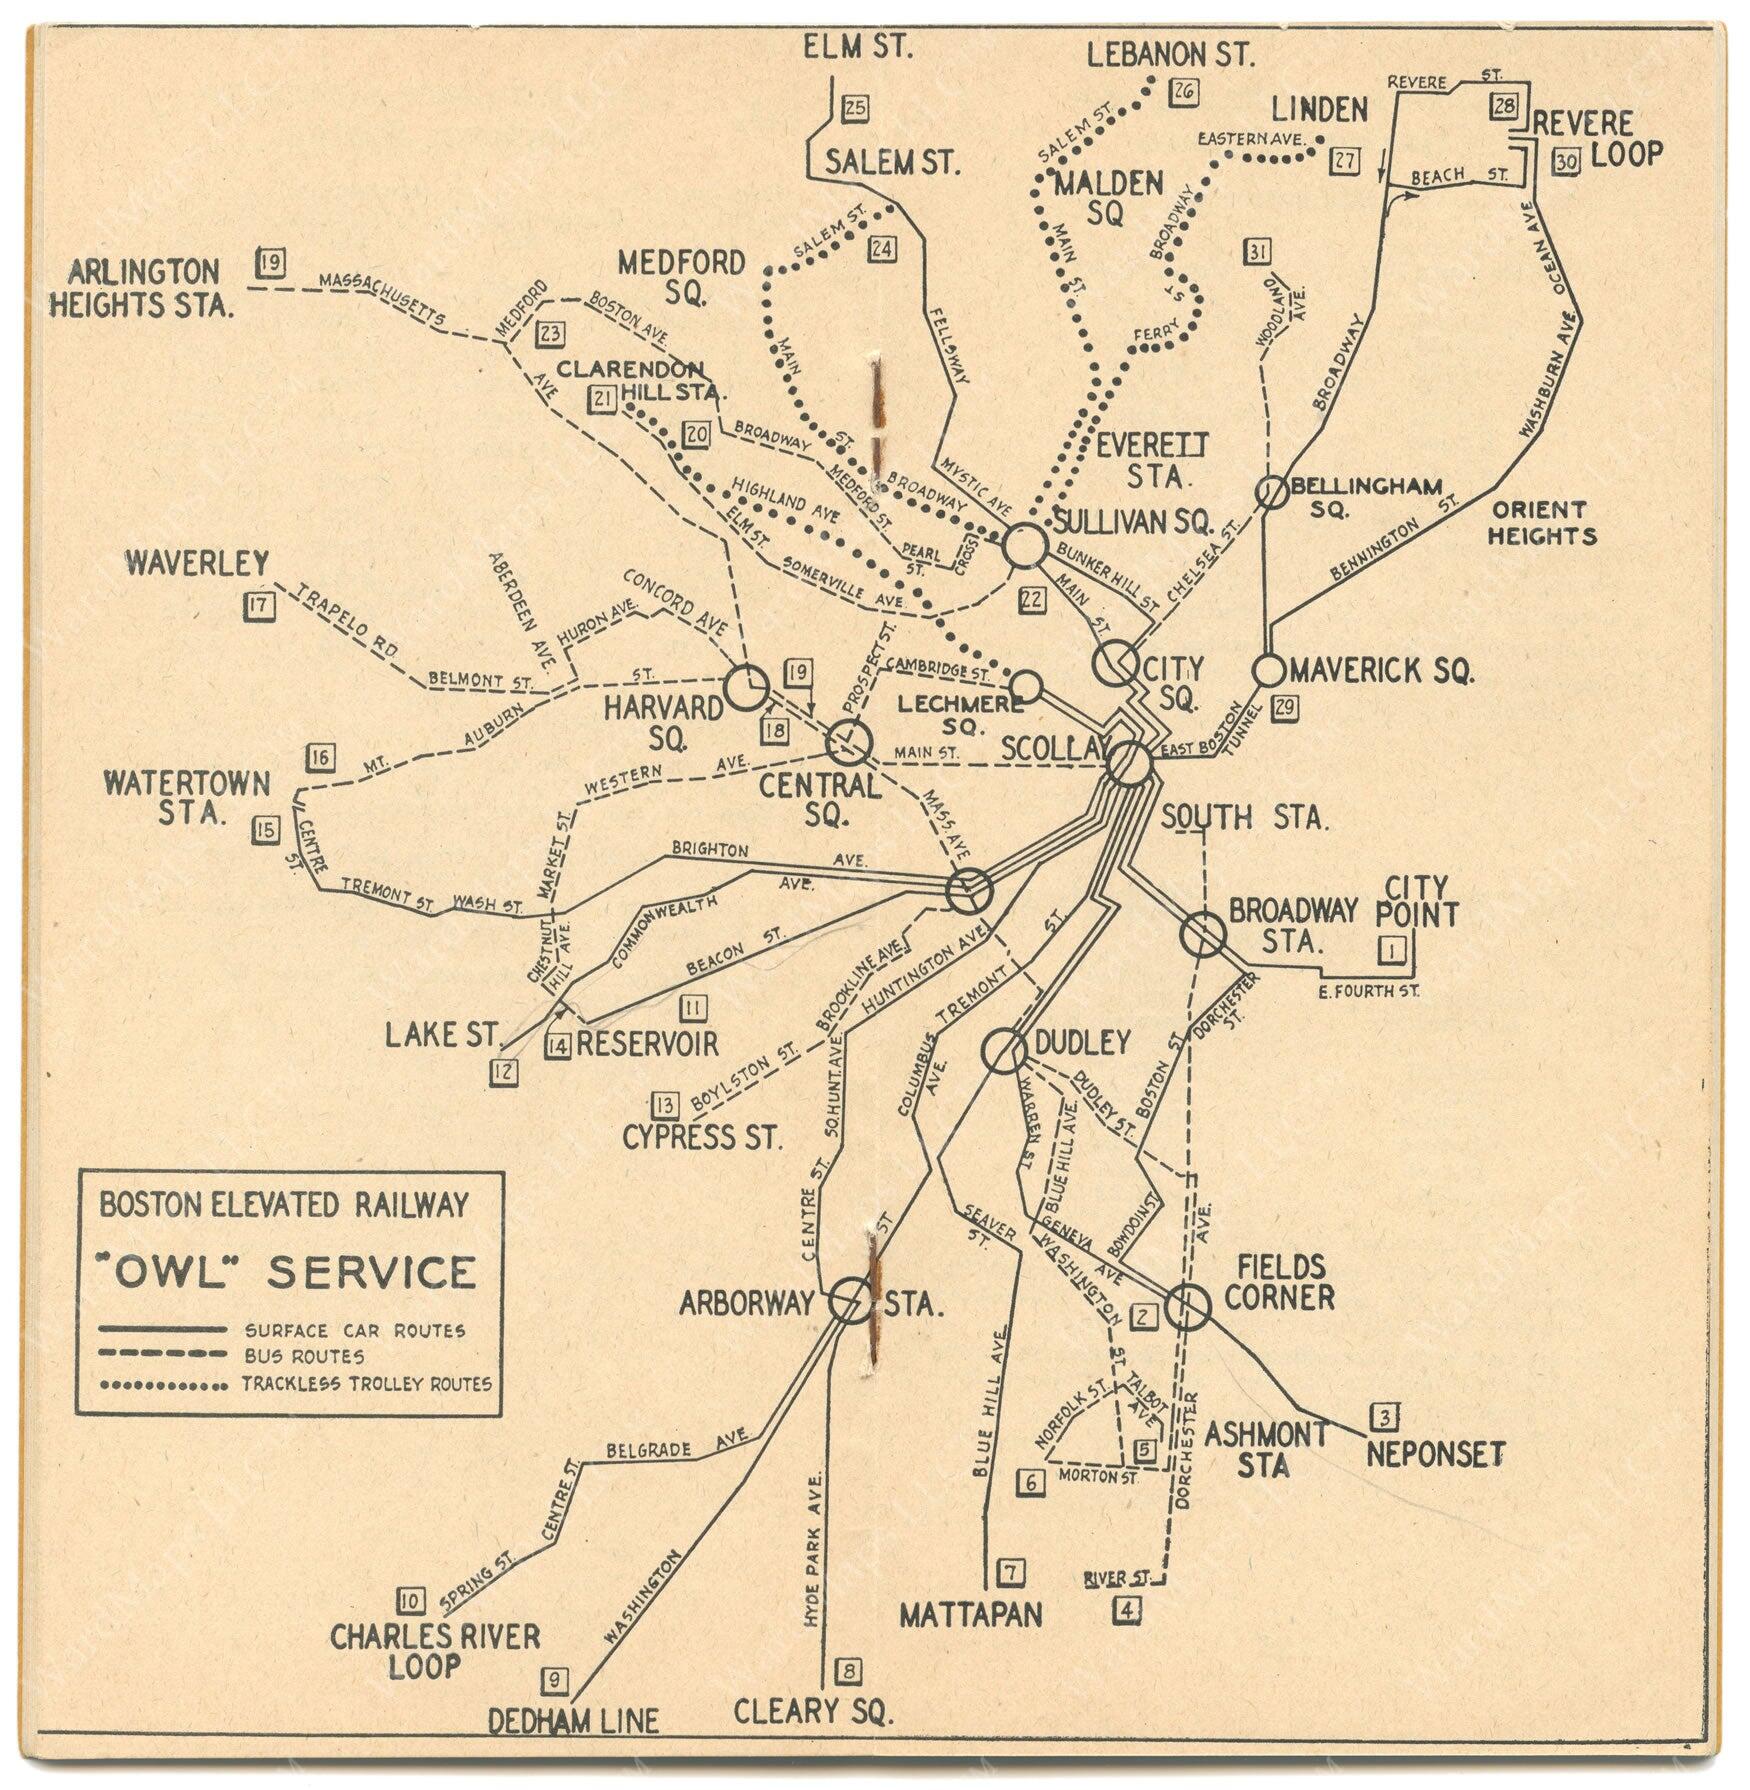 A photo of a printed 1947 paper map showing "owl service" (night service) provided by the Boston Elevated Railway Company and the Metropolitan Transit Authority. The map runs to Medford at the top, Mattapan at the bottom, Arlington Heights and Watertown Station at left, and Revere Loop, Orient Heights, and Neponset at right.Holes where staples used to be run down the center. 